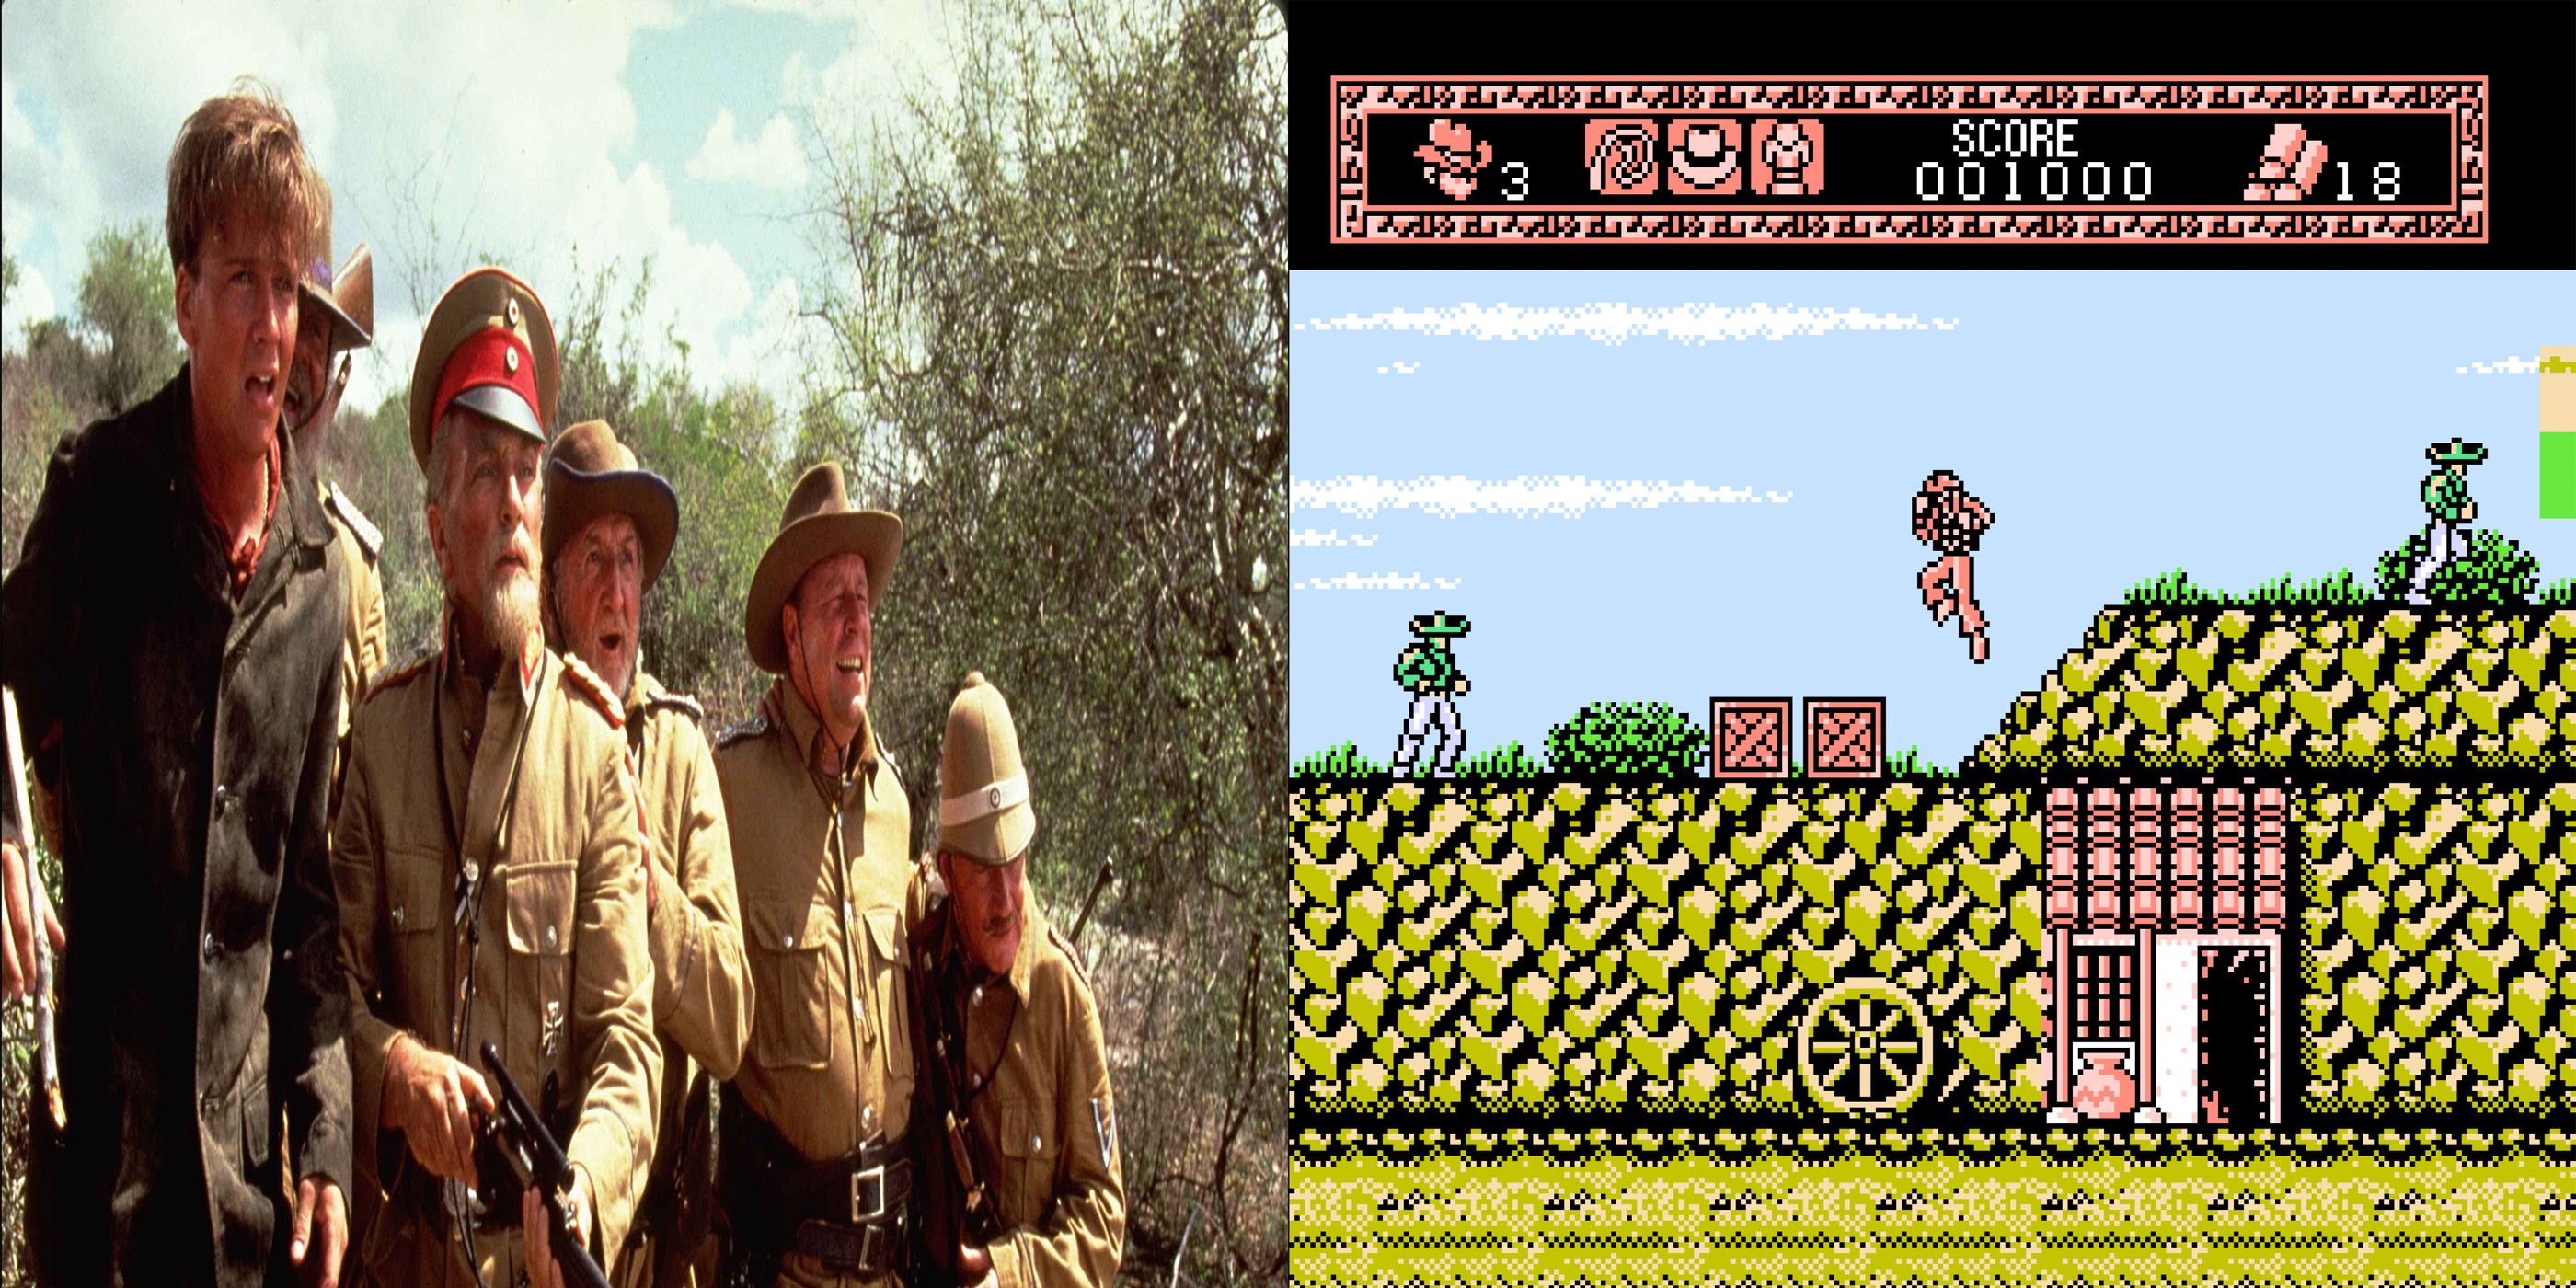 The Young Indiana Jones Chronicles for NES